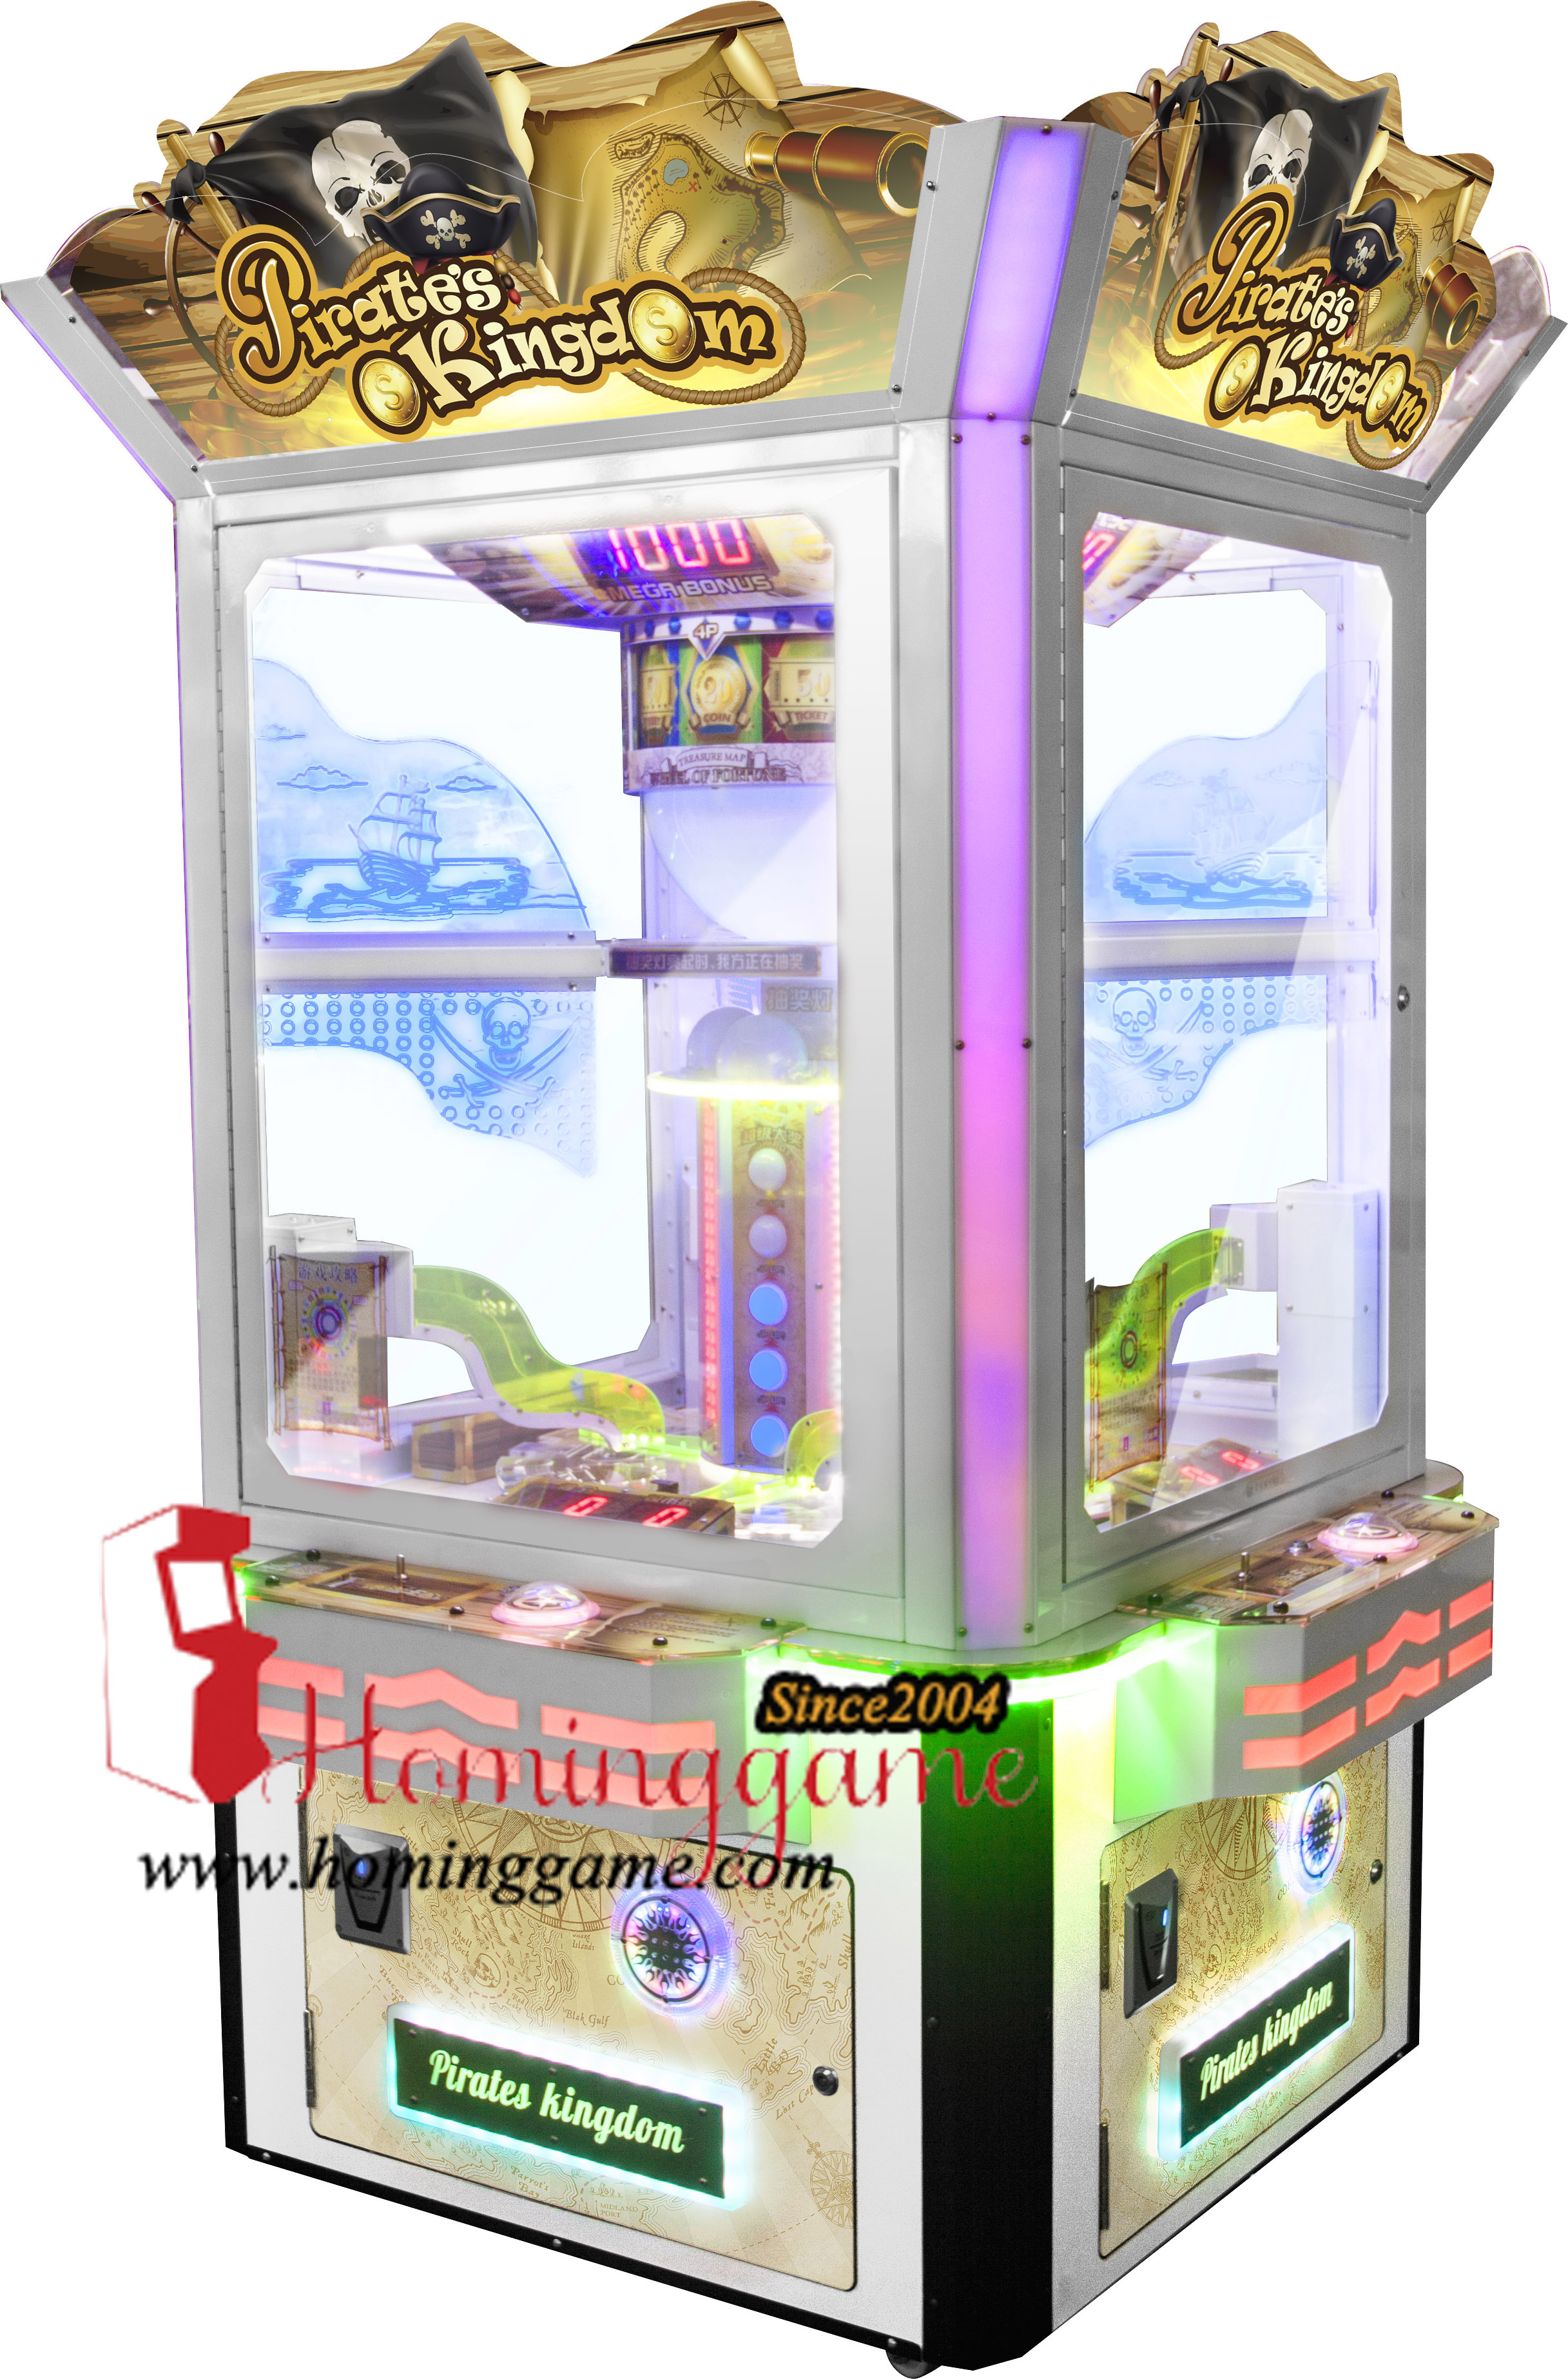 Pirate's KingDom Redemption Arcade Game Machine,Hot Sale Lottery Redemption Tickate Game,Pirate's KingDom,Pirate KingDom Game Machine,Redemption Game Machine,Redemption ticket game machine,Game Machine,Arcade Game Machine,Coin operated game machine,Amusement park game machine,Indoor game machine,Family Entertainment,Family Entertainment game machine,Game Equipment,Slot Game Machine,Coin Games,Kids Game Machine